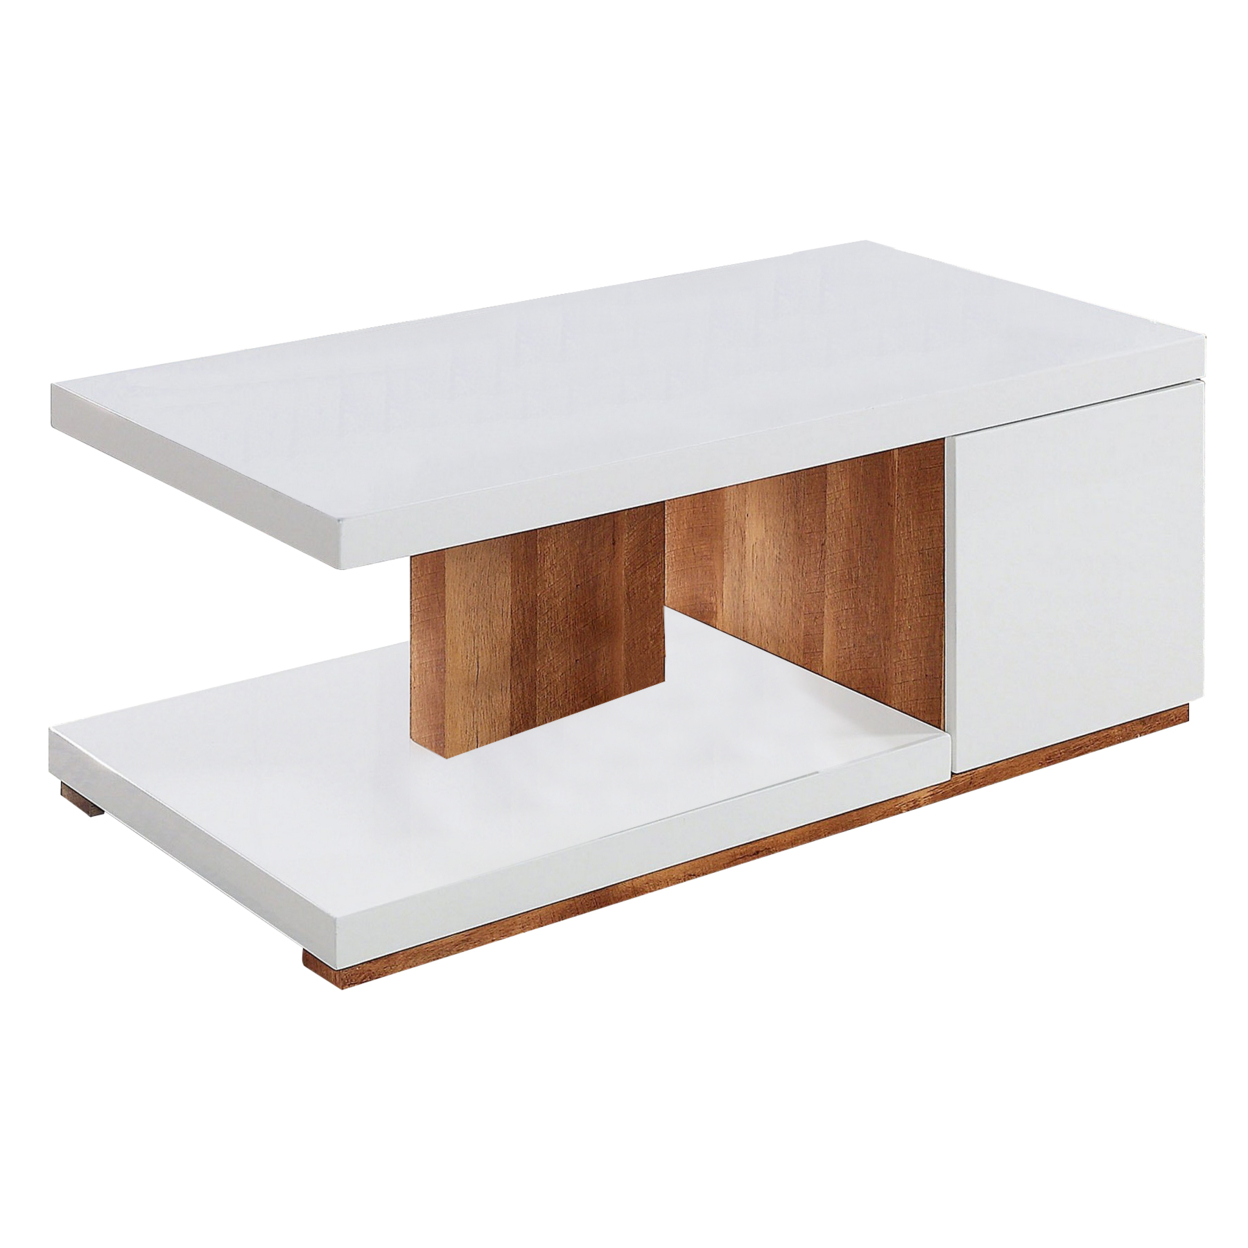 Replicated Wooden Base Coffee Table With 1 Open Shelf, White And Brown- Saltoro Sherpi